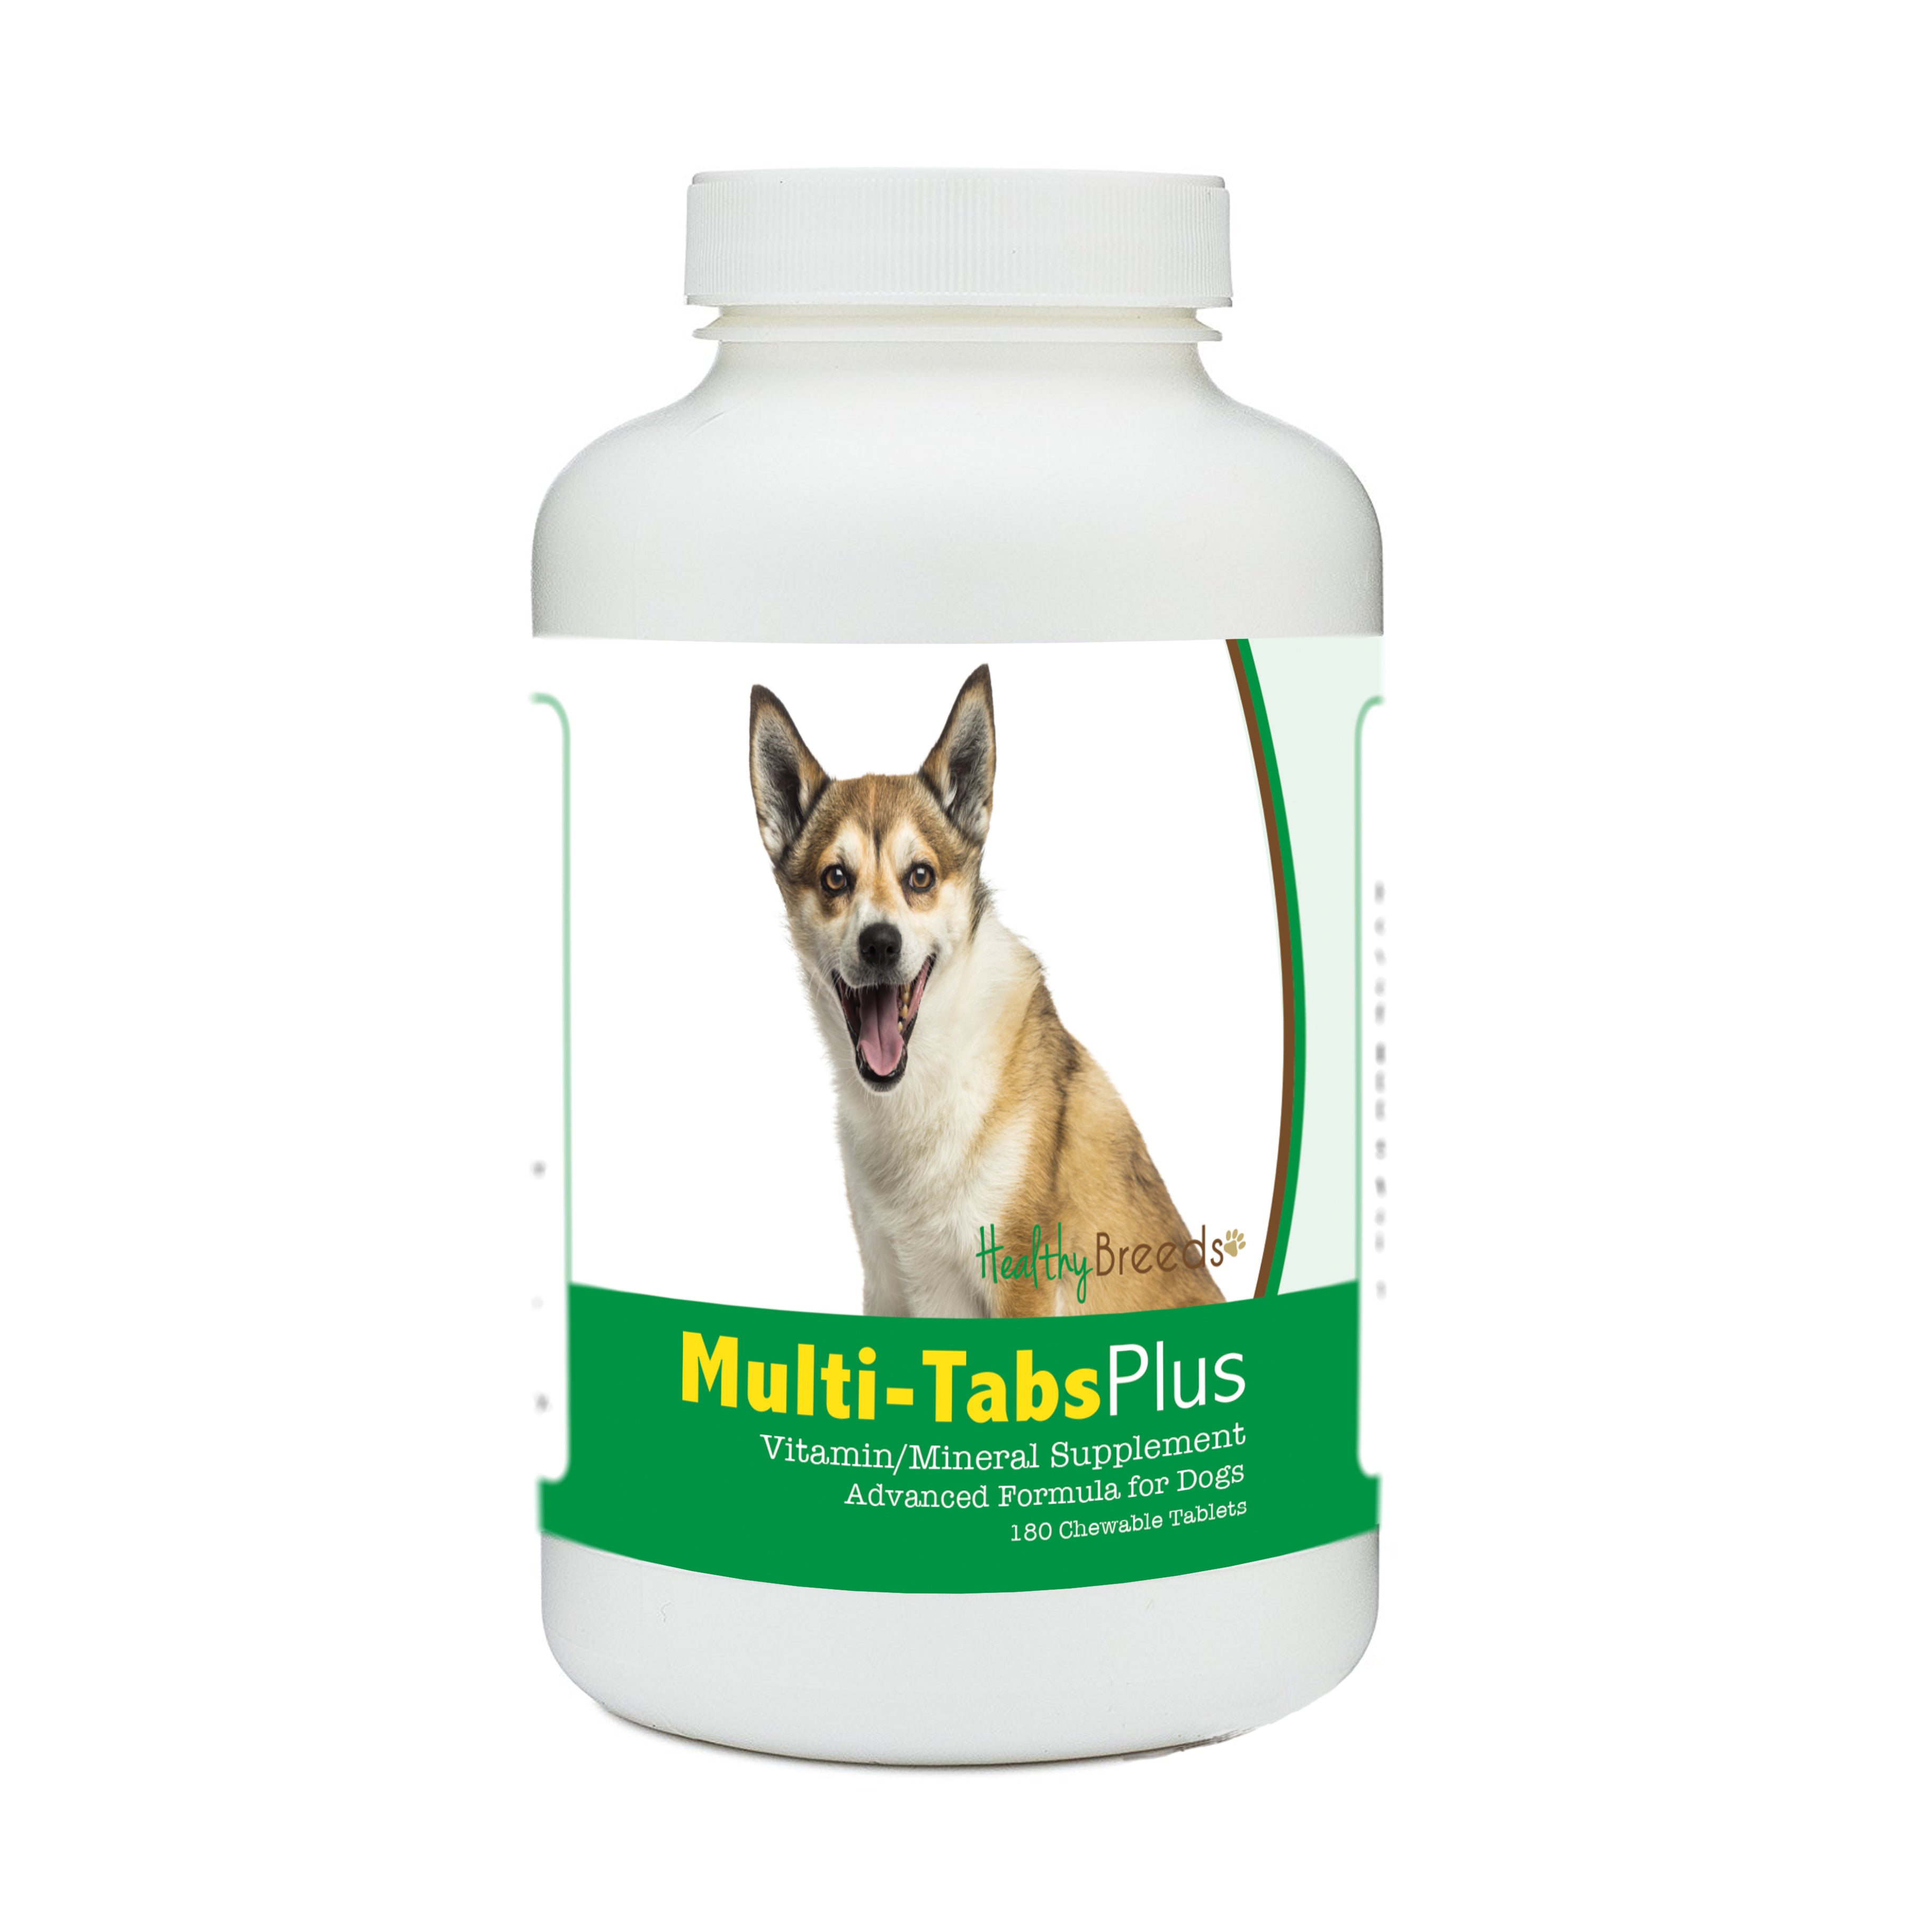 Norwegian Lundehund Multi-Tabs Plus Chewable Tablets 180 Count